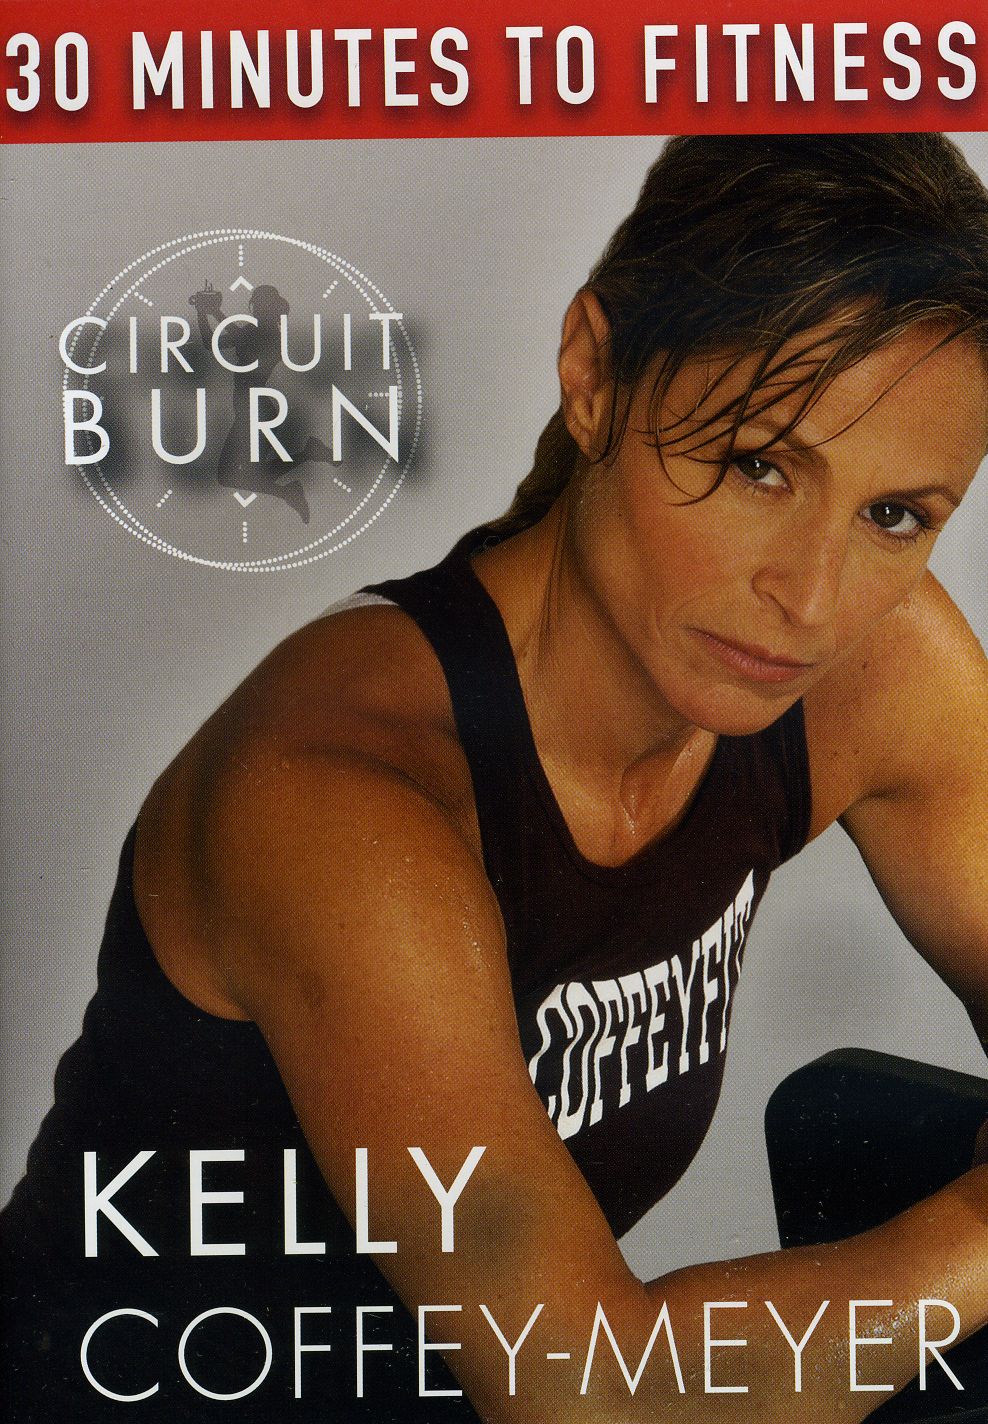 30 MINUTES TO FITNESS: CIRCUIT BURN WITH KELLY